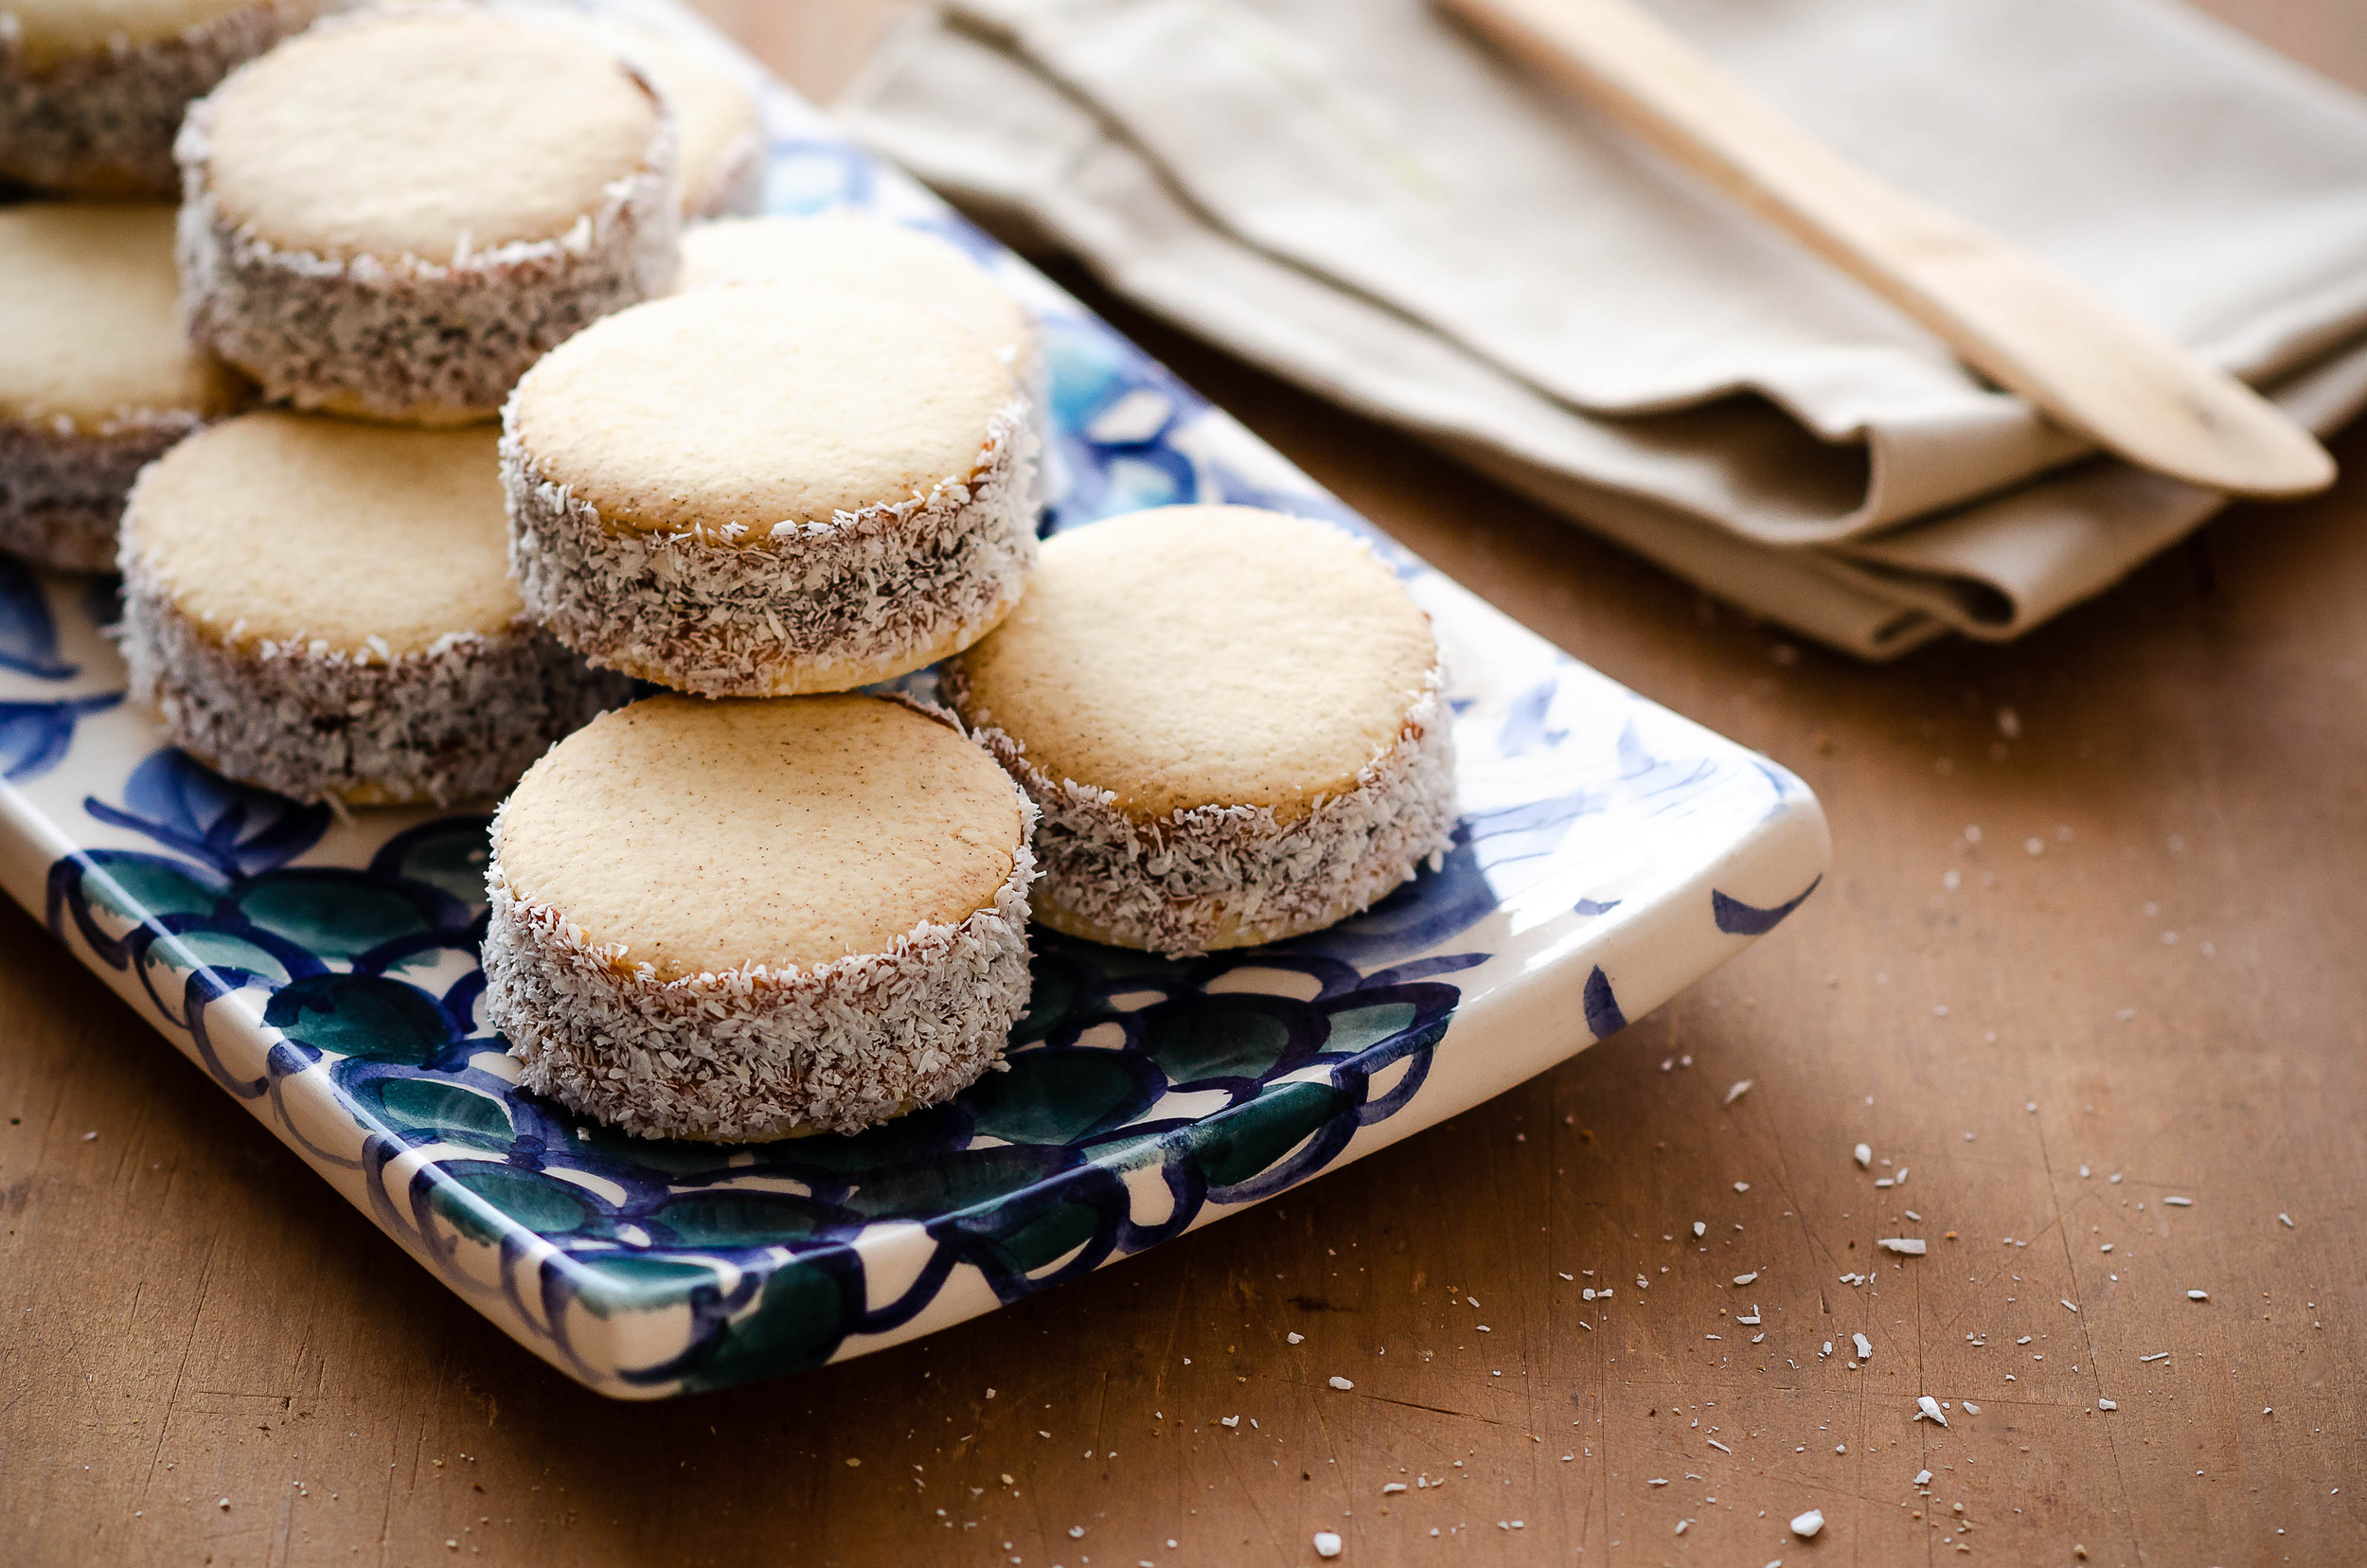 <p>Straight out of Argentina, these small sandwich cookies are filled with dulce de leche and coated in shredded coconut. They’re sure to impress nearly anyone, and you can make 50 of them in under an hour with <a href="https://vintagekitchennotes.com/the-best-alfajores-recipe-ever/"><span>this recipe from Vintage Kitchen Notes</span></a>.</p><p><a href='https://www.msn.com/en-us/community/channel/vid-cj9pqbr0vn9in2b6ddcd8sfgpfq6x6utp44fssrv6mc2gtybw0us'>Follow us on MSN to see more of our exclusive lifestyle content.</a></p>